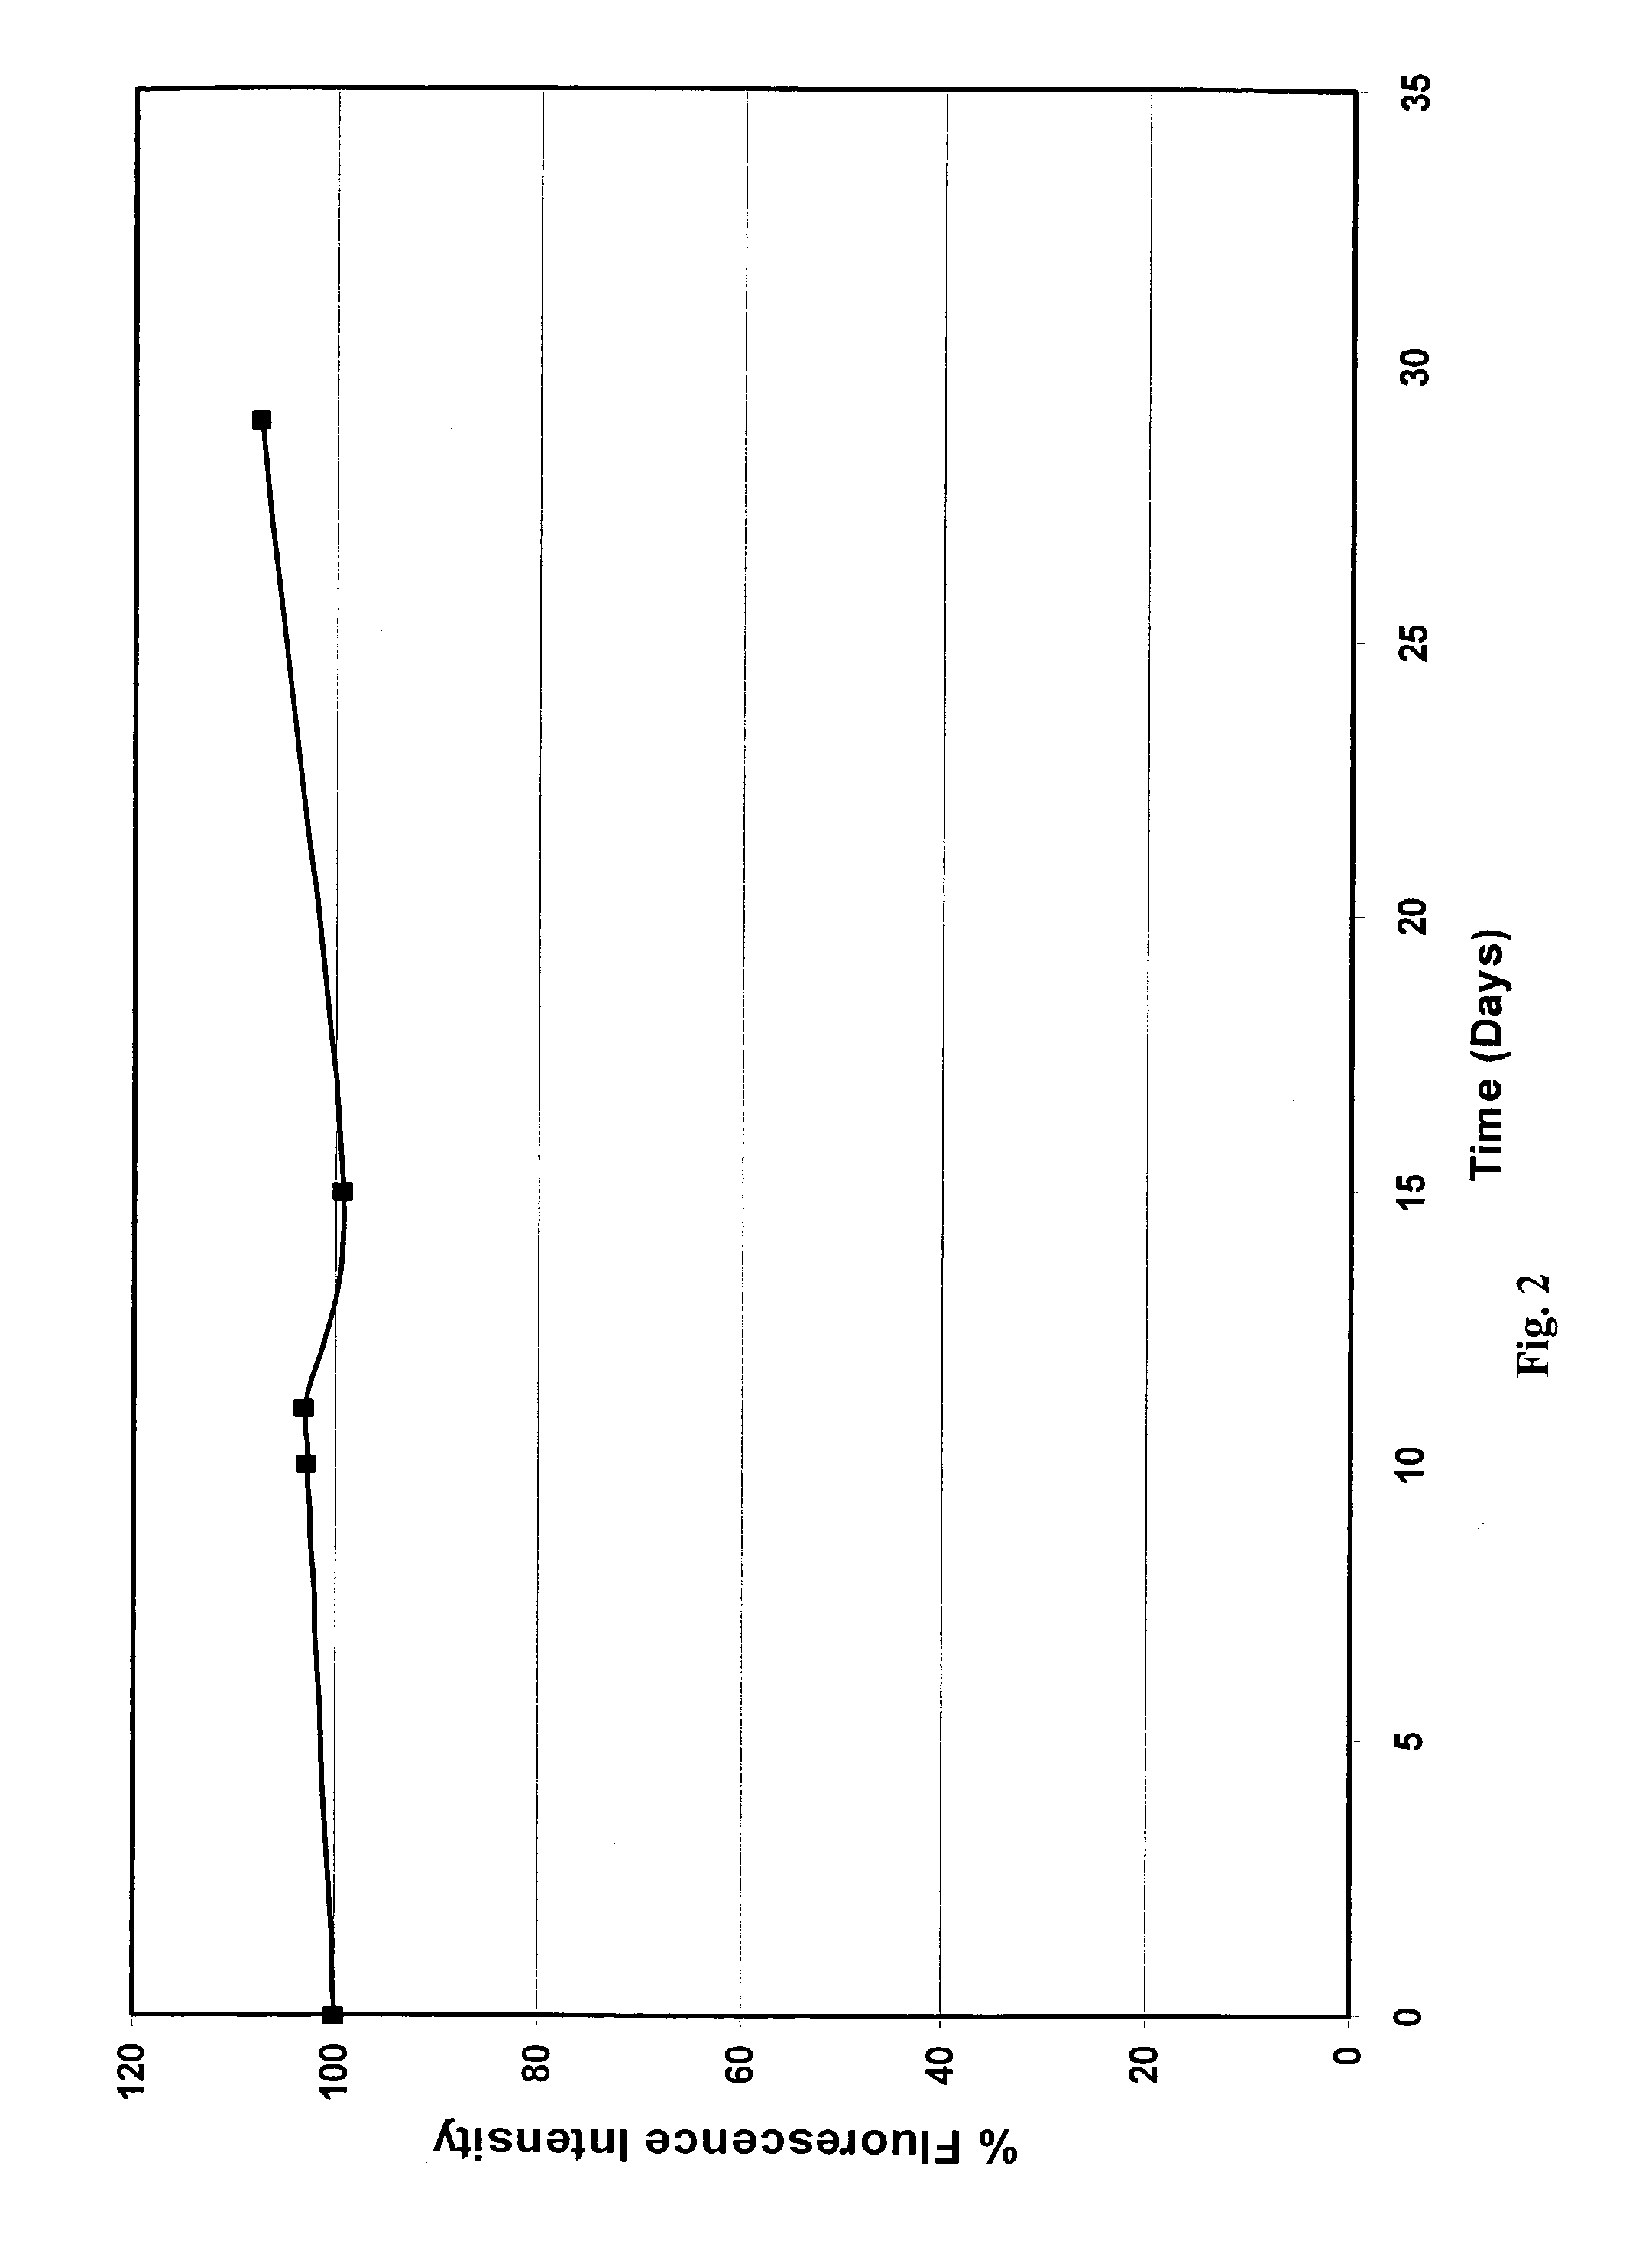 Functionalized compositions for improved immobilization